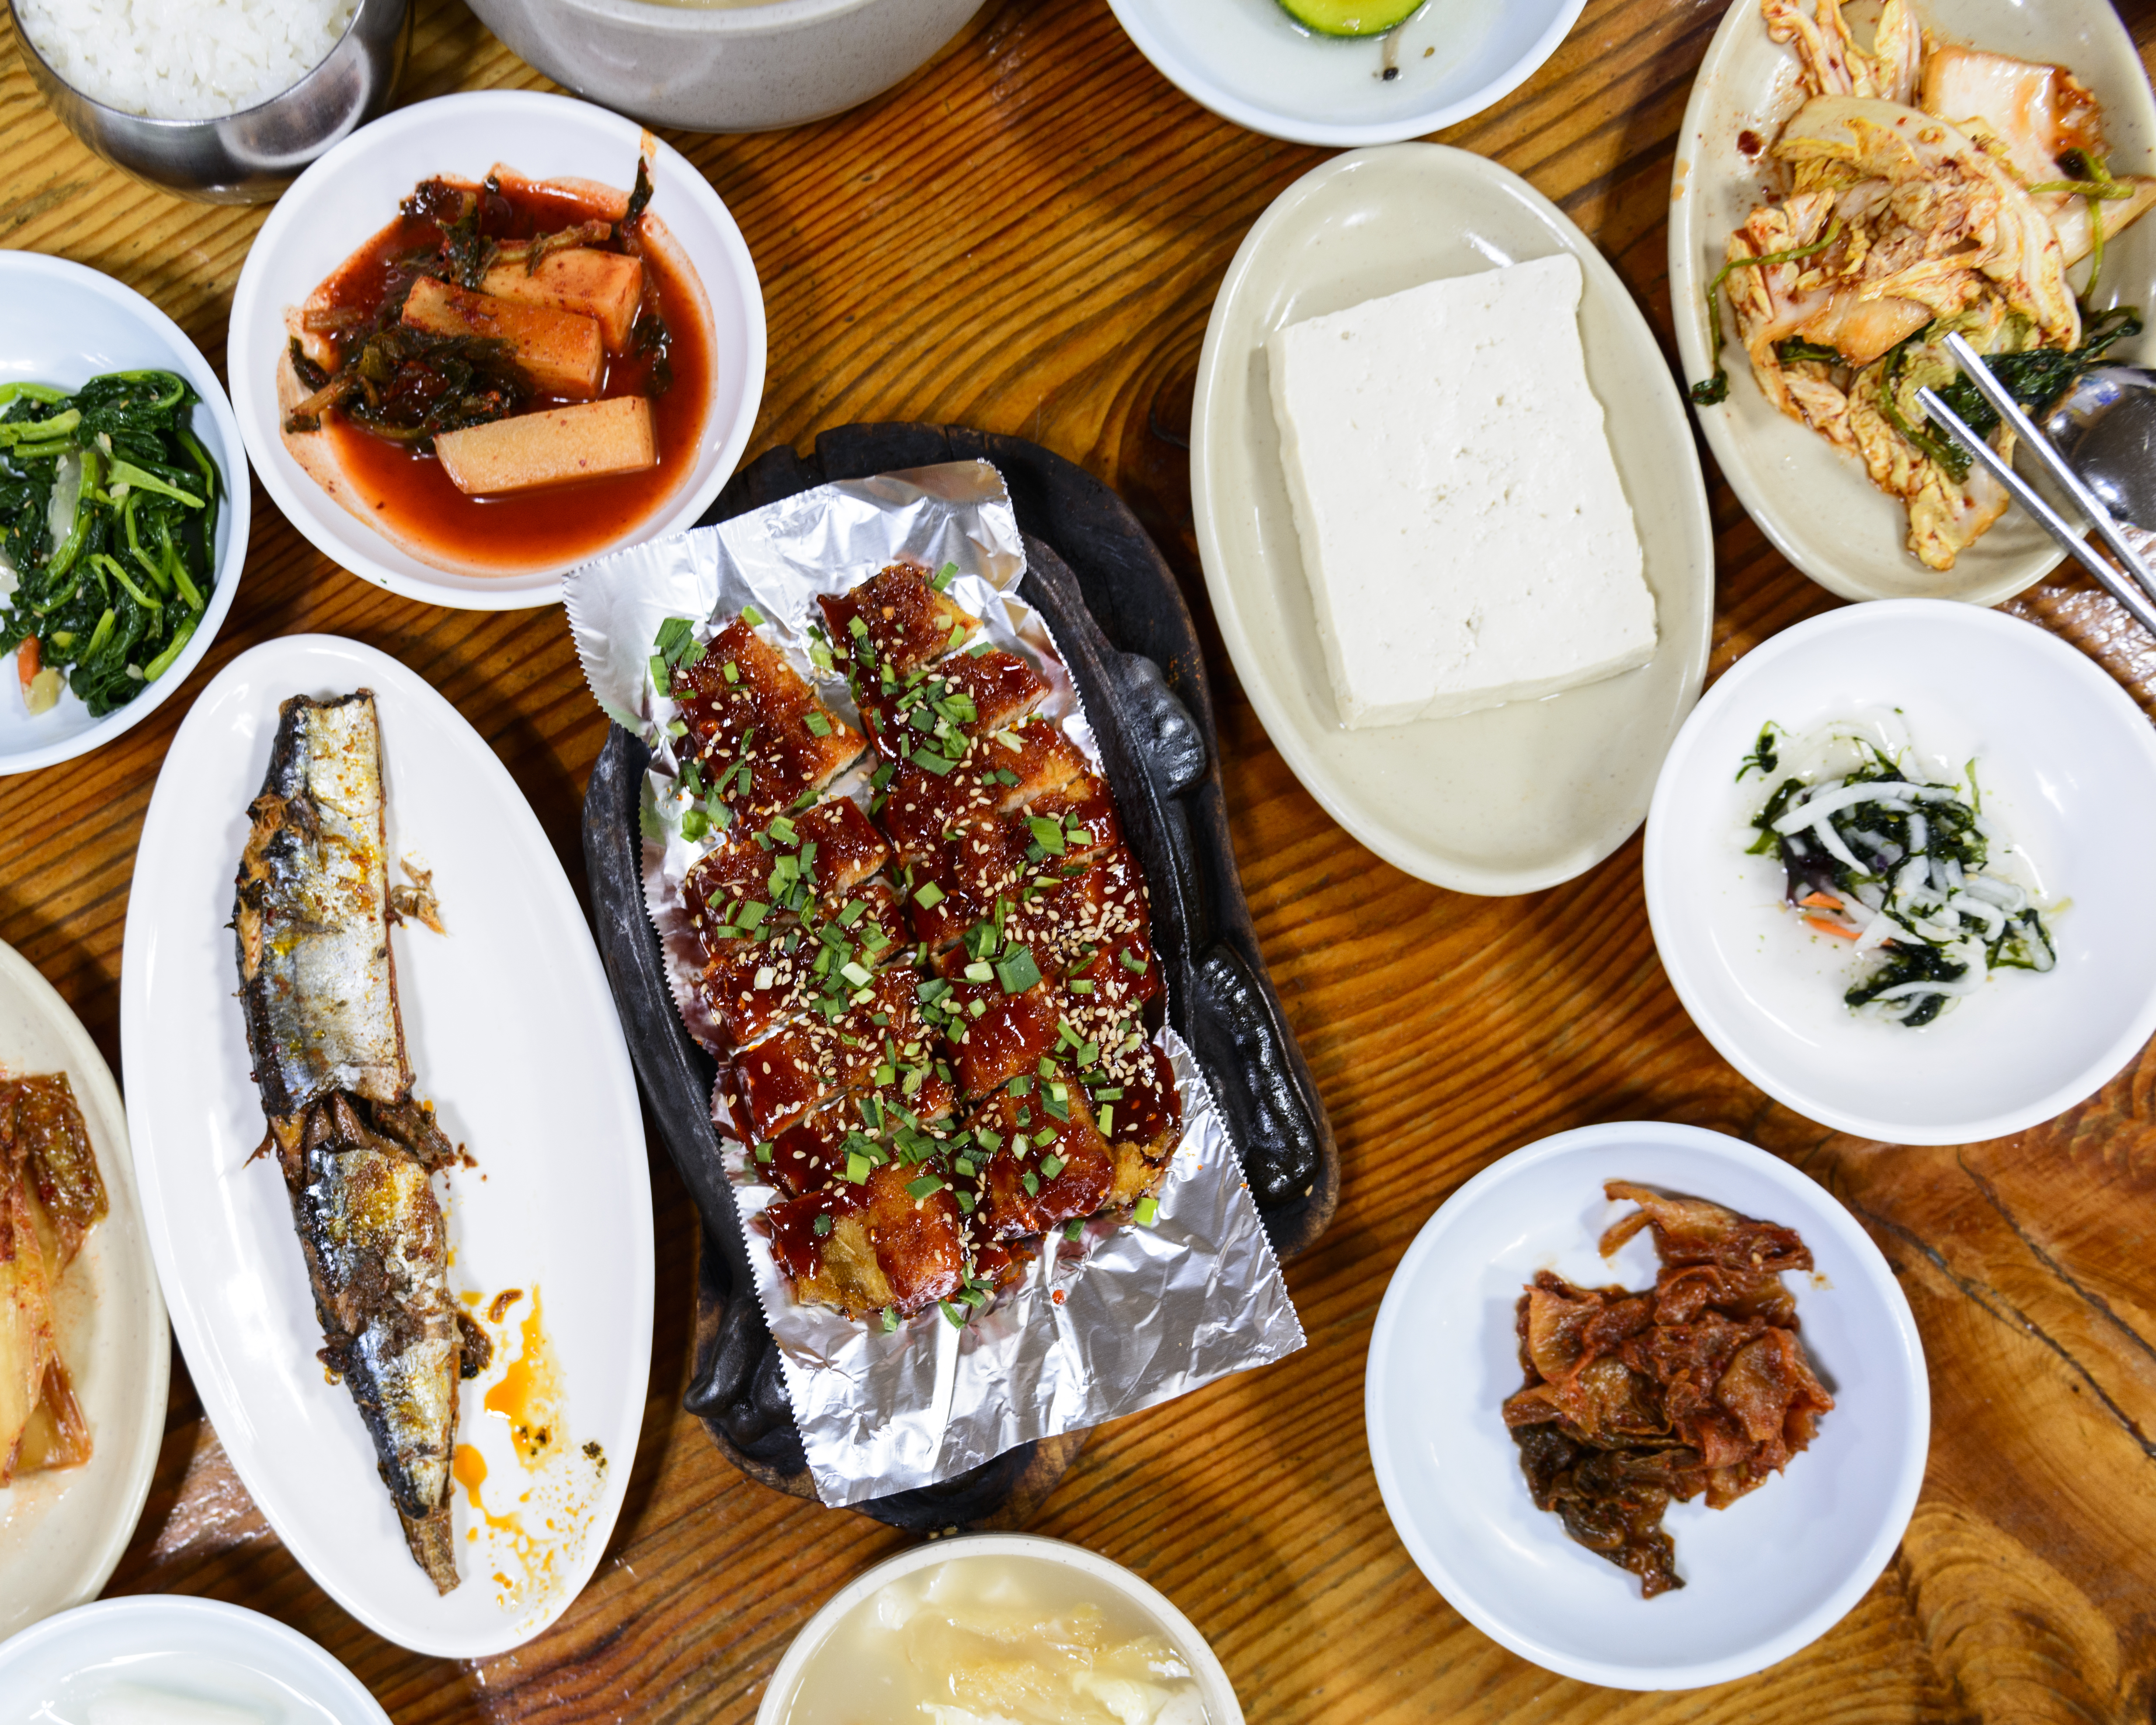 Korean Side Dishes of Kim Chi and pickled fish